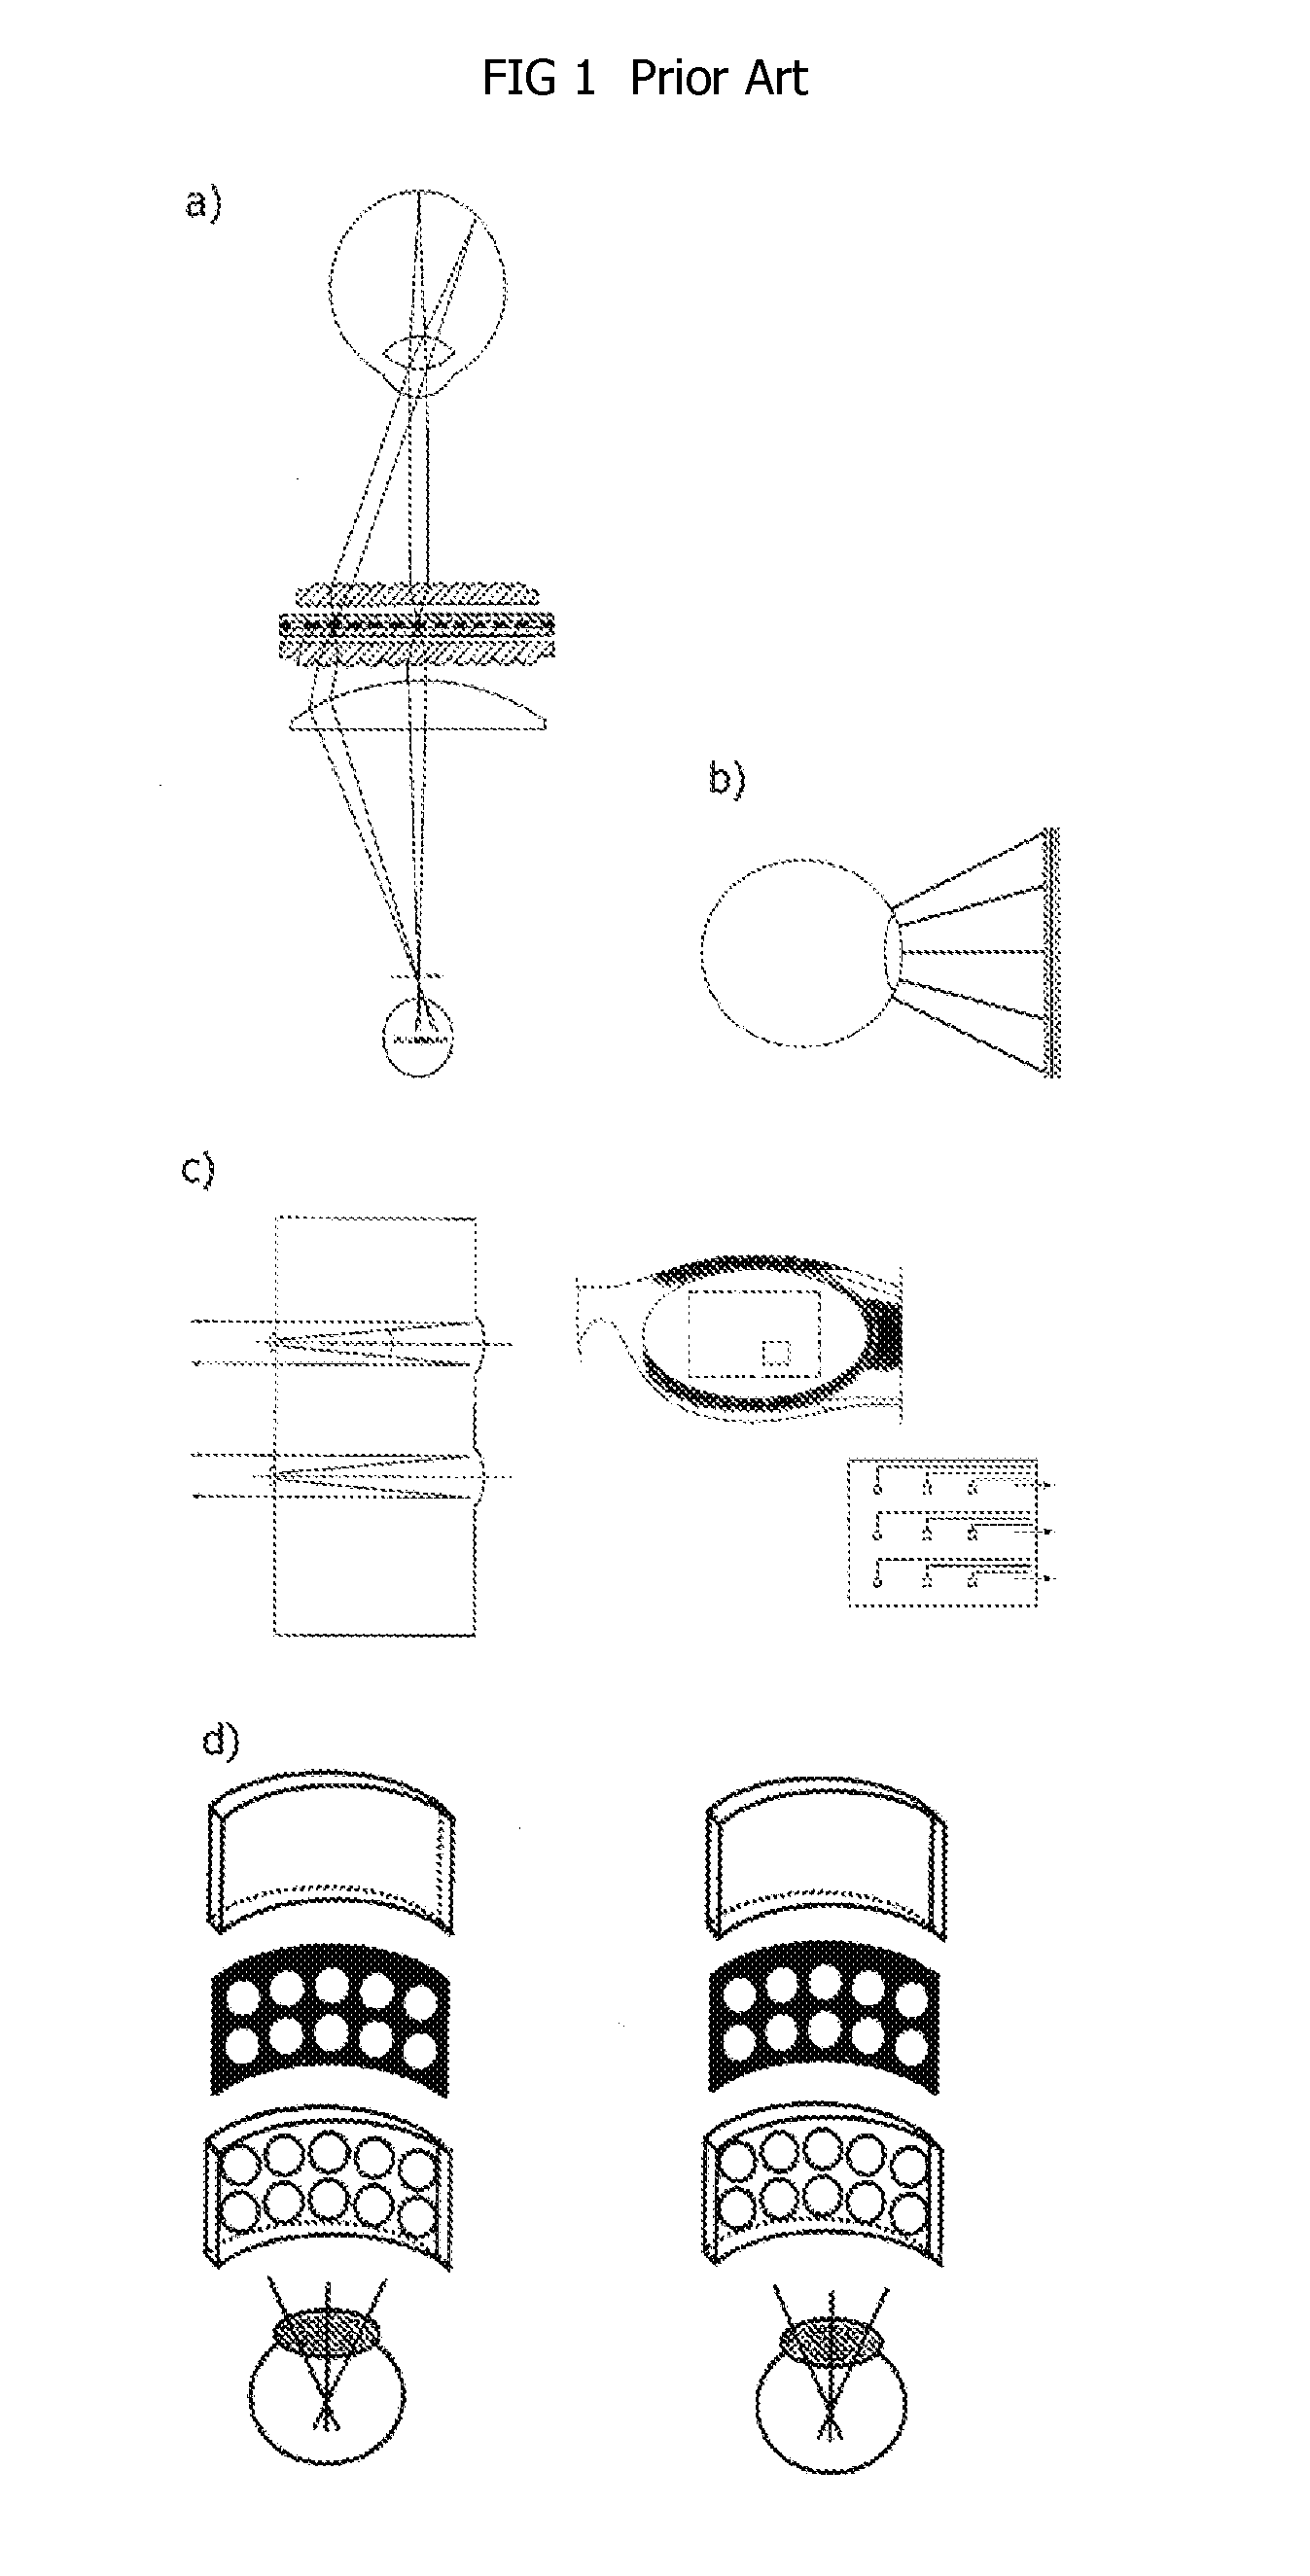 Wearable display devices